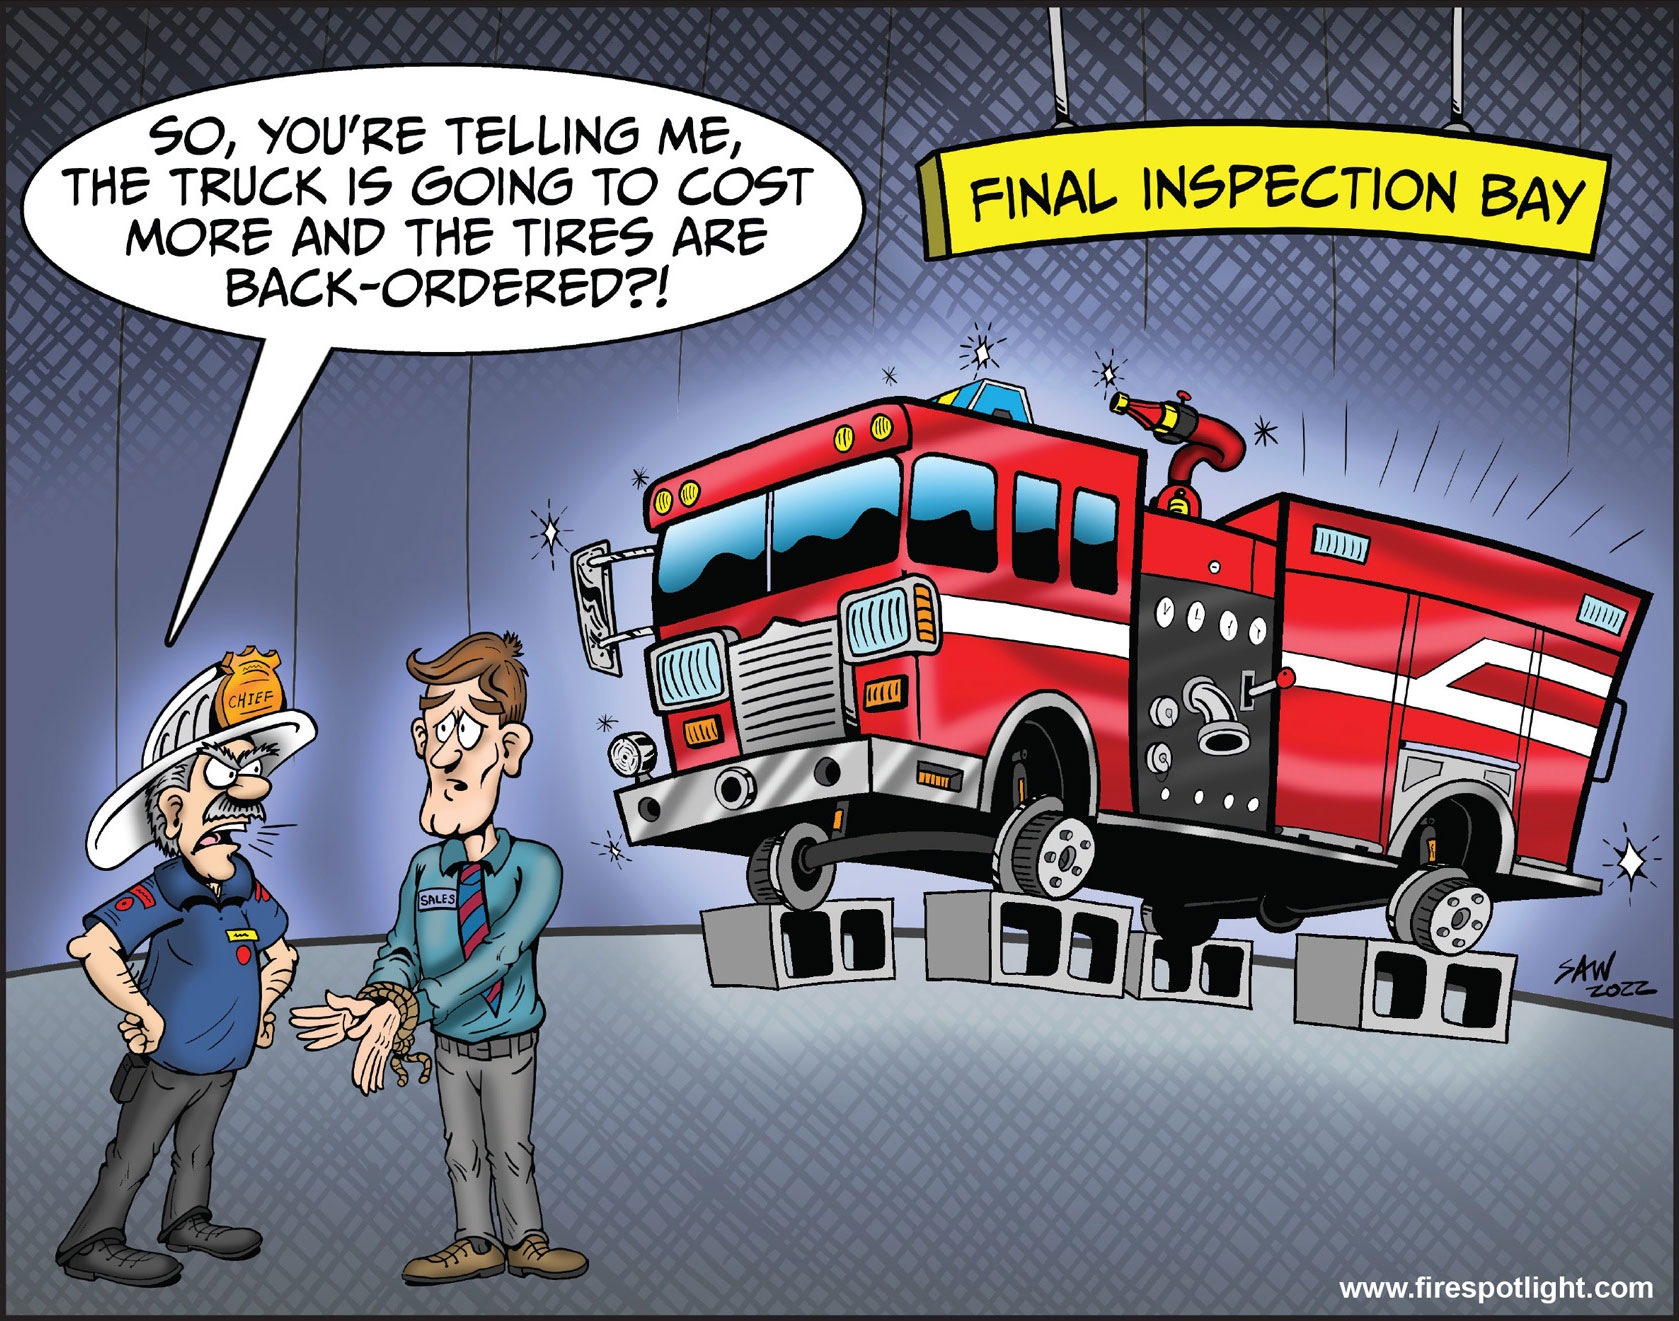 Featured image for “Fire Truck Final Inspection”